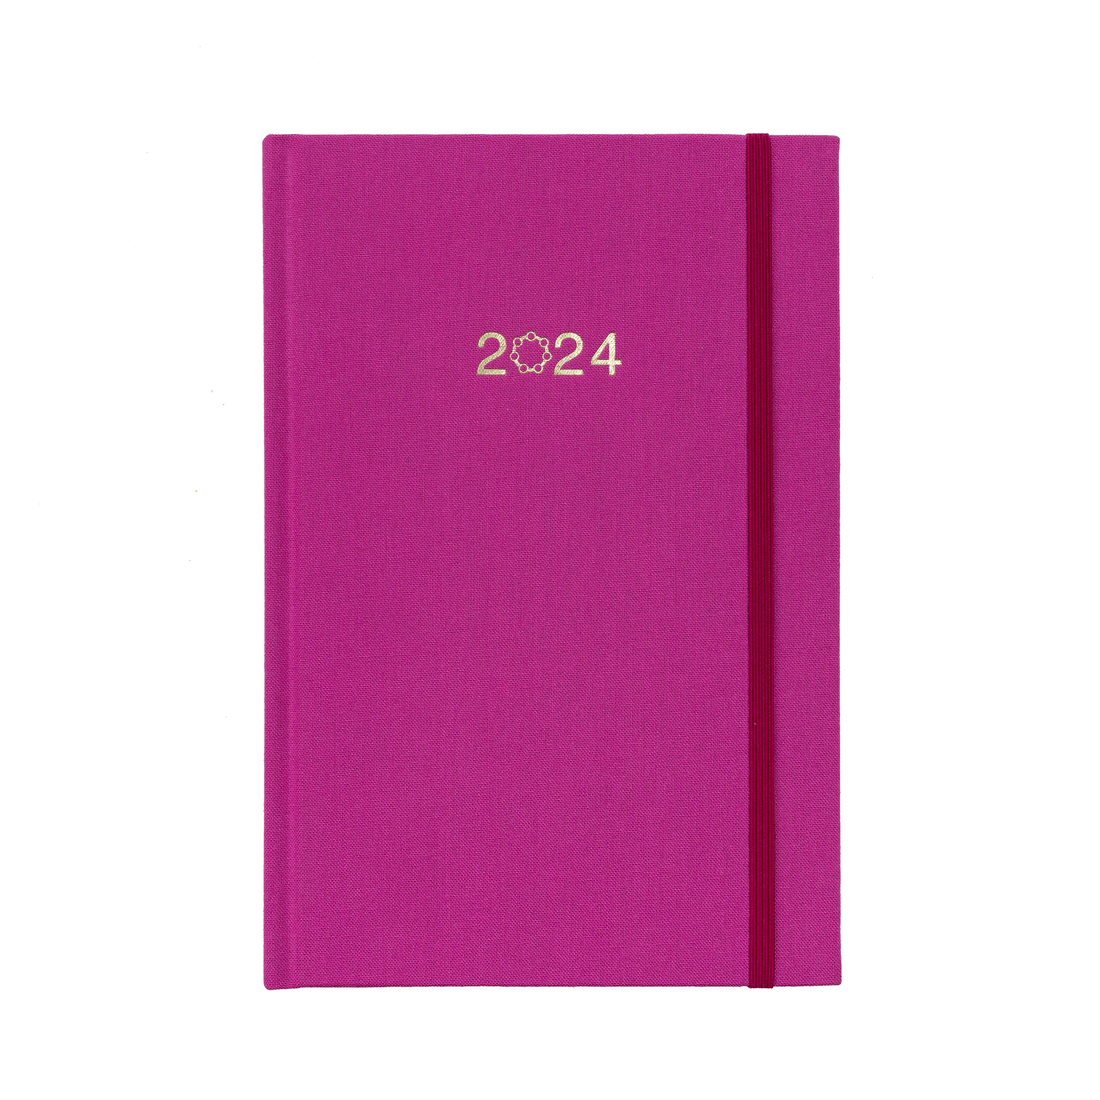  A beautiful fuchsia linen planner with 2024 on the cover and a matching fuchsia elastic closure